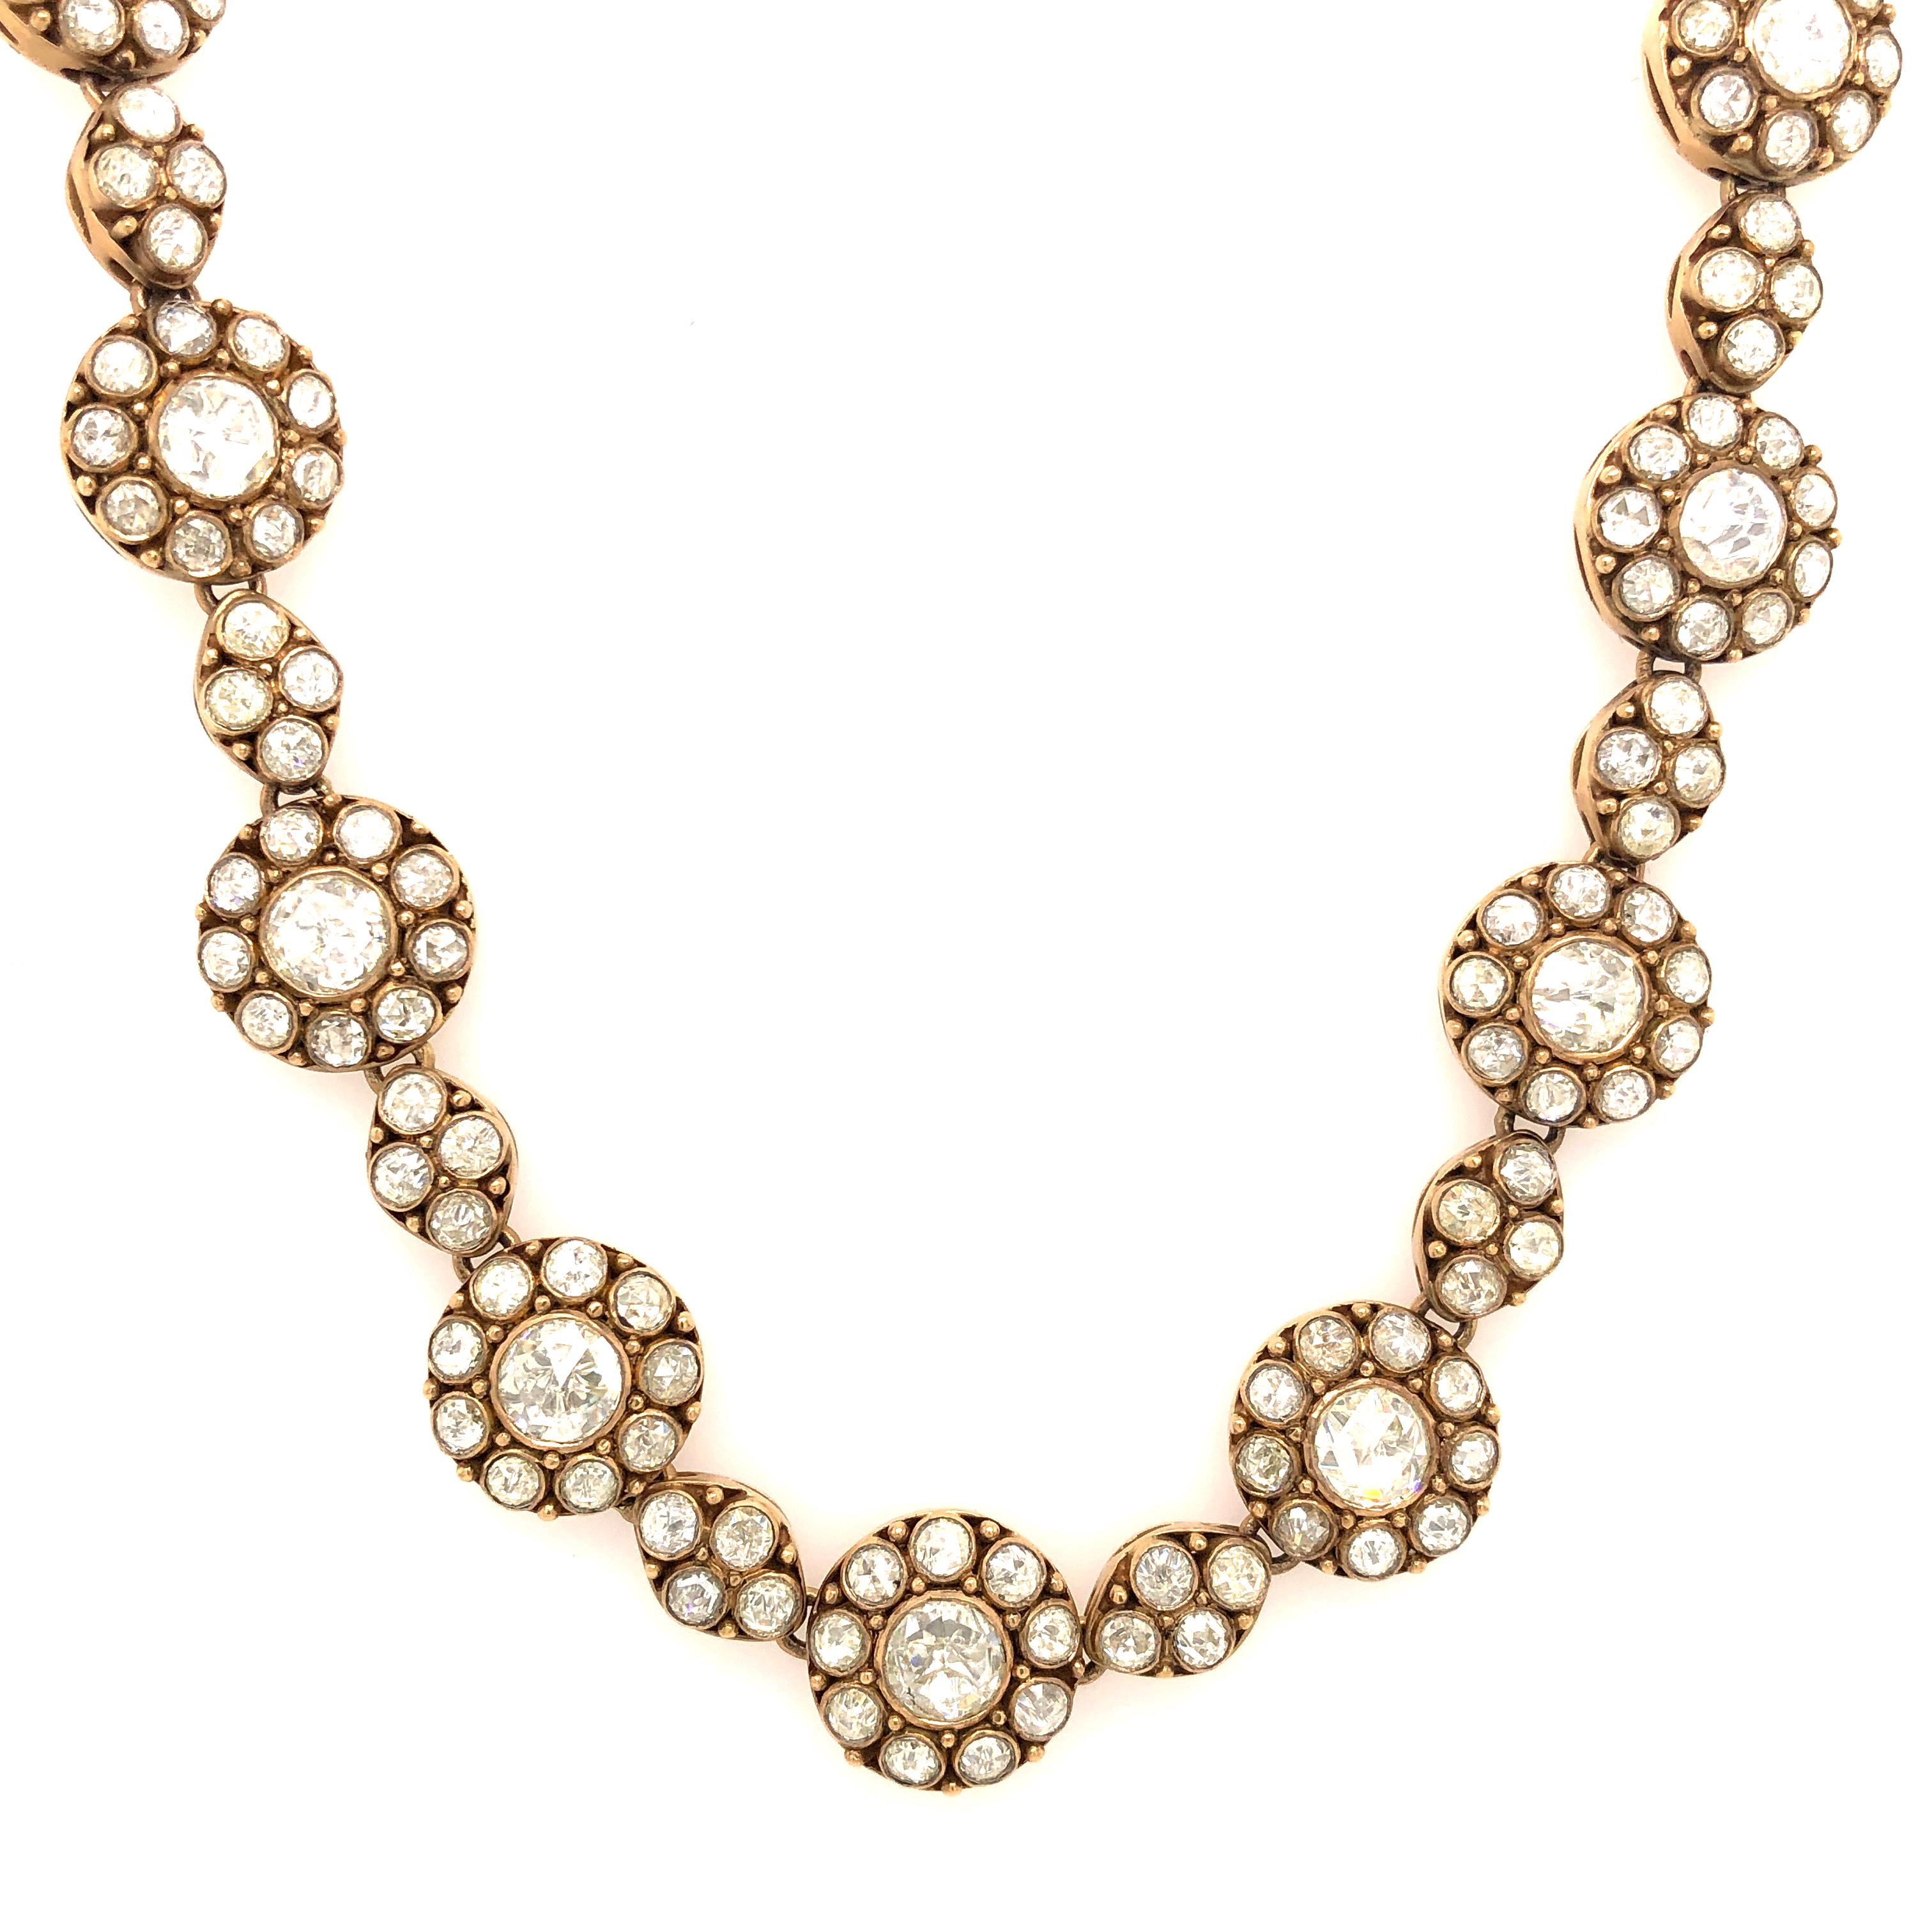  Handcrafted from 18-karat gold, this one-of-a-kind necklace is set with a dazzling array of round rosecut diamonds. This necklace is 15.5 inches long with a nice lobster clasp at the back. Wear it with a plunge-front dress or unbuttoned blouse.